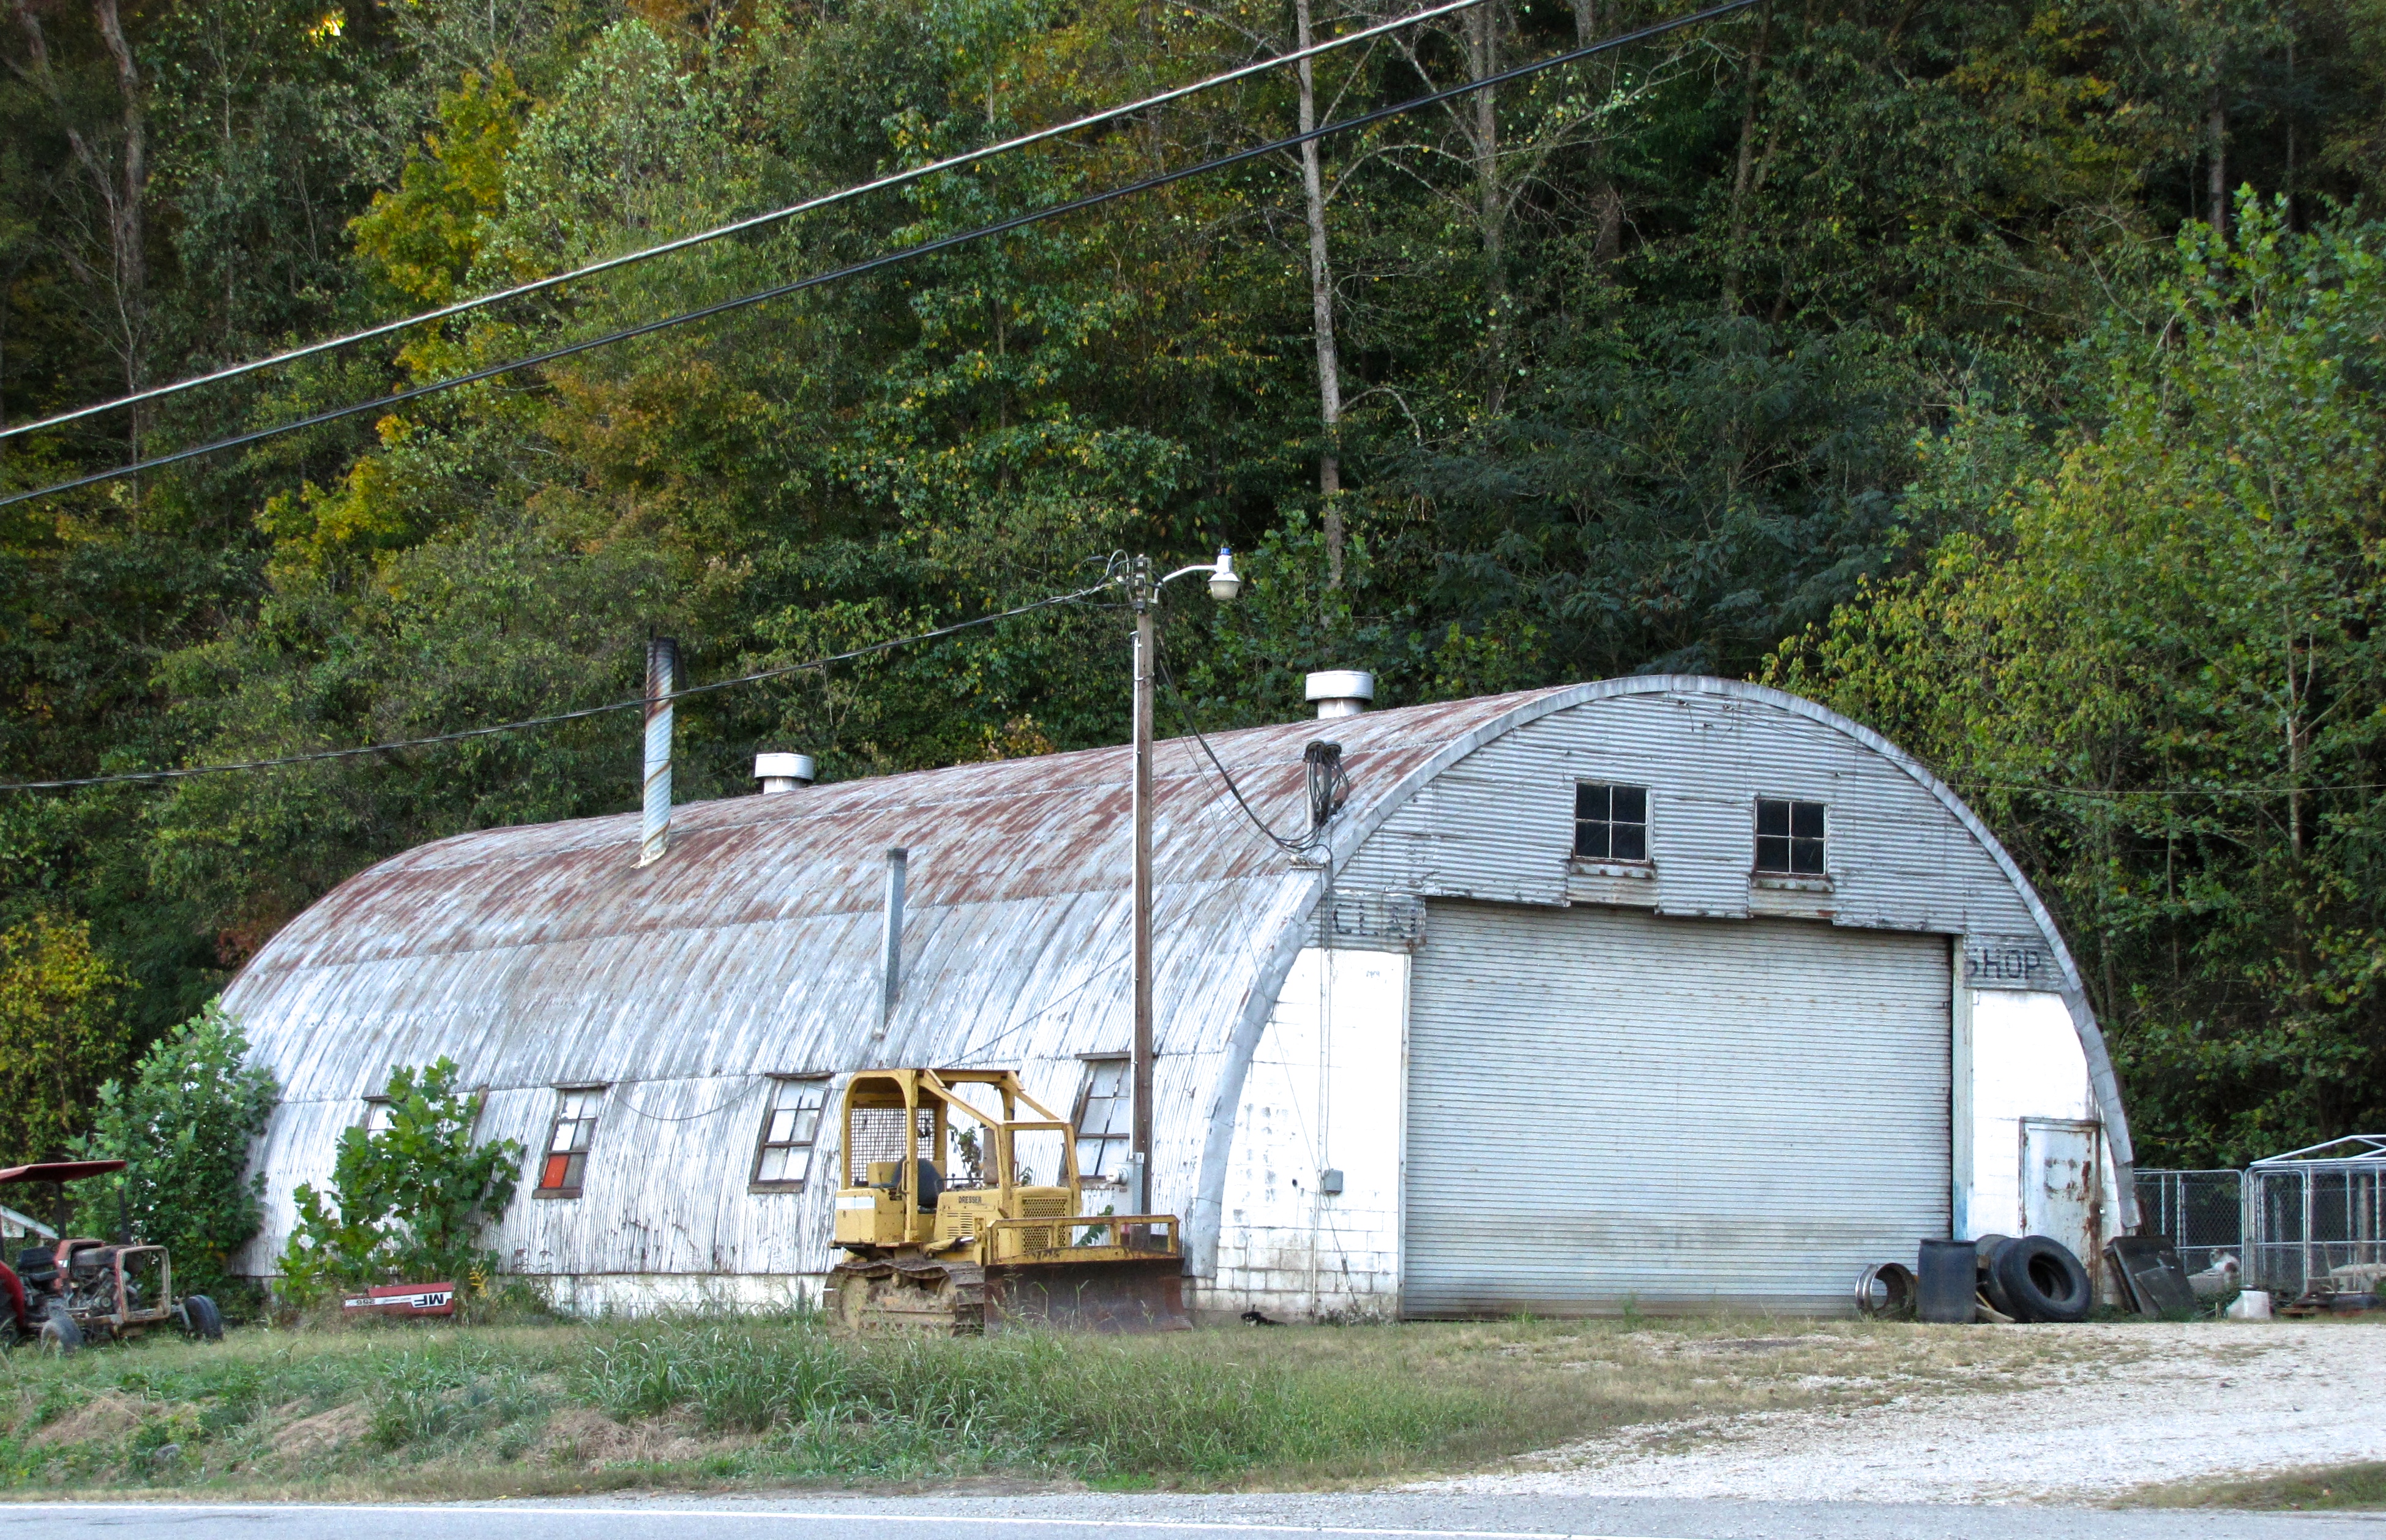 quonset hut in Aberdeen, MD